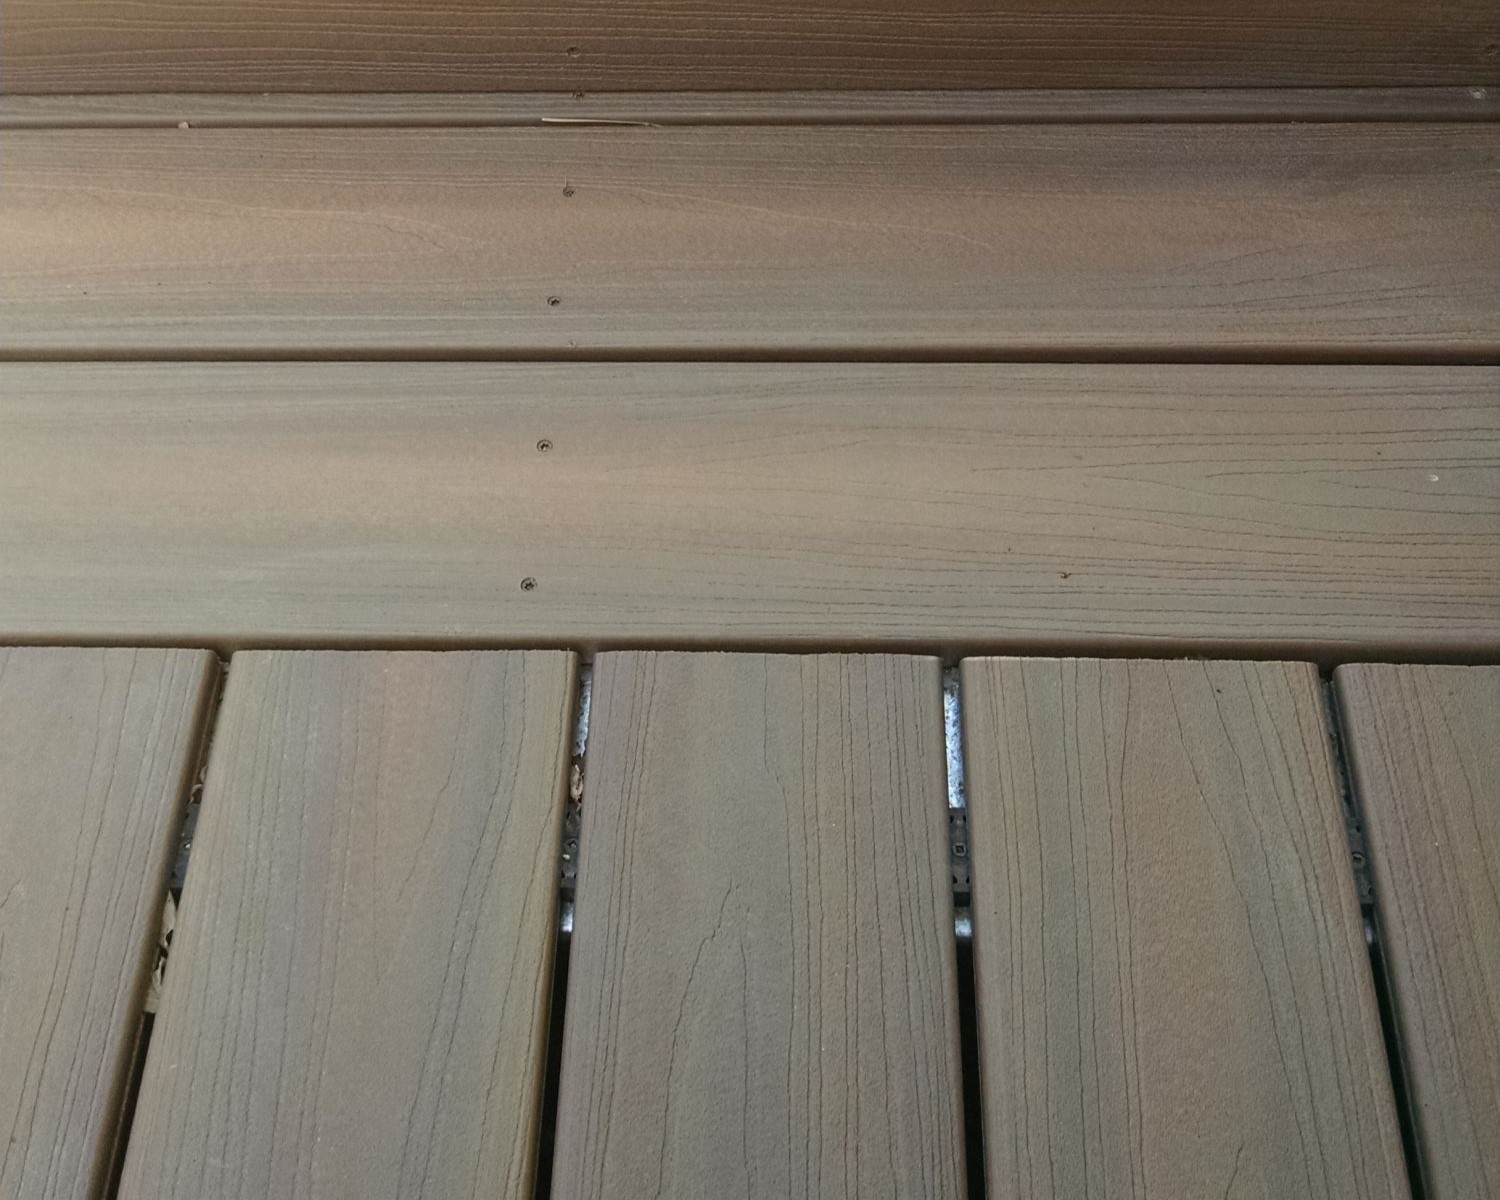 A close up view of 90-degree composite boards with double end boards.